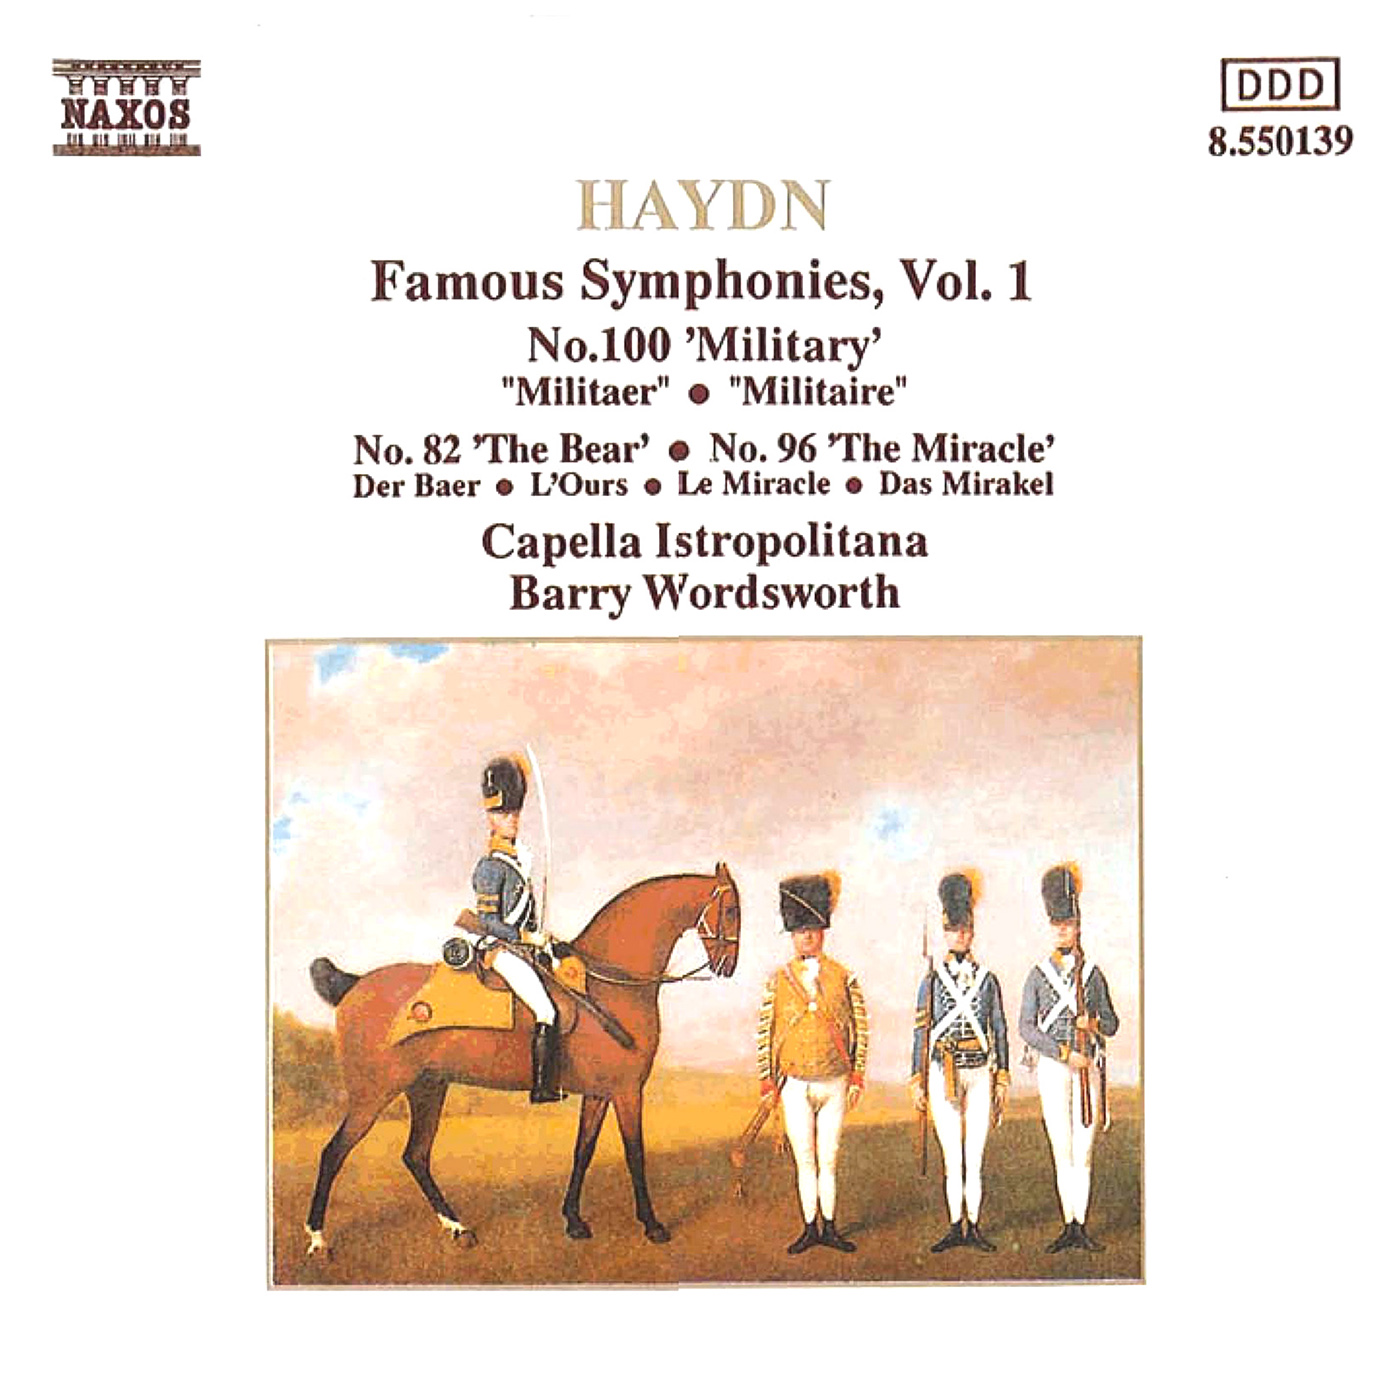 Symphony No. 96 in D Major, Hob.I:96, "The Miracle":II. Andante